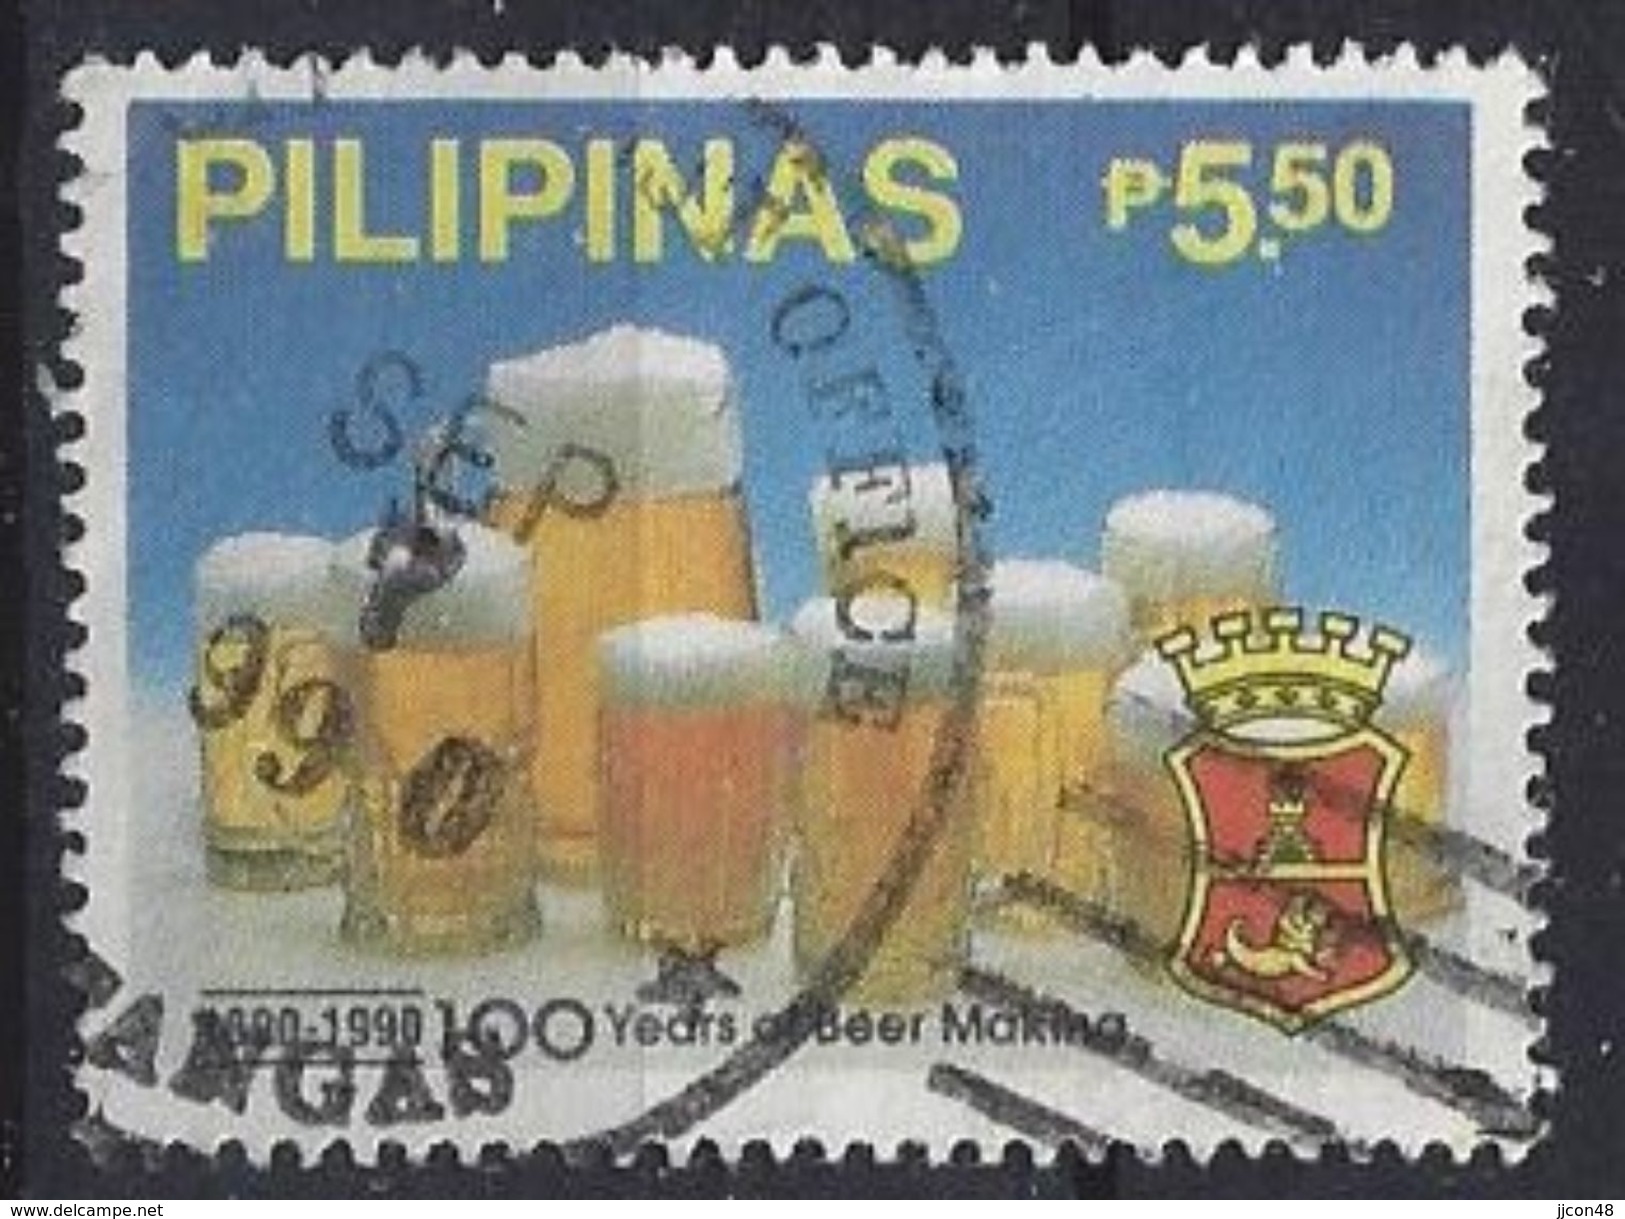 Philiippines  1990  San Miguel Brewery   5p.50 (o) - Philippines